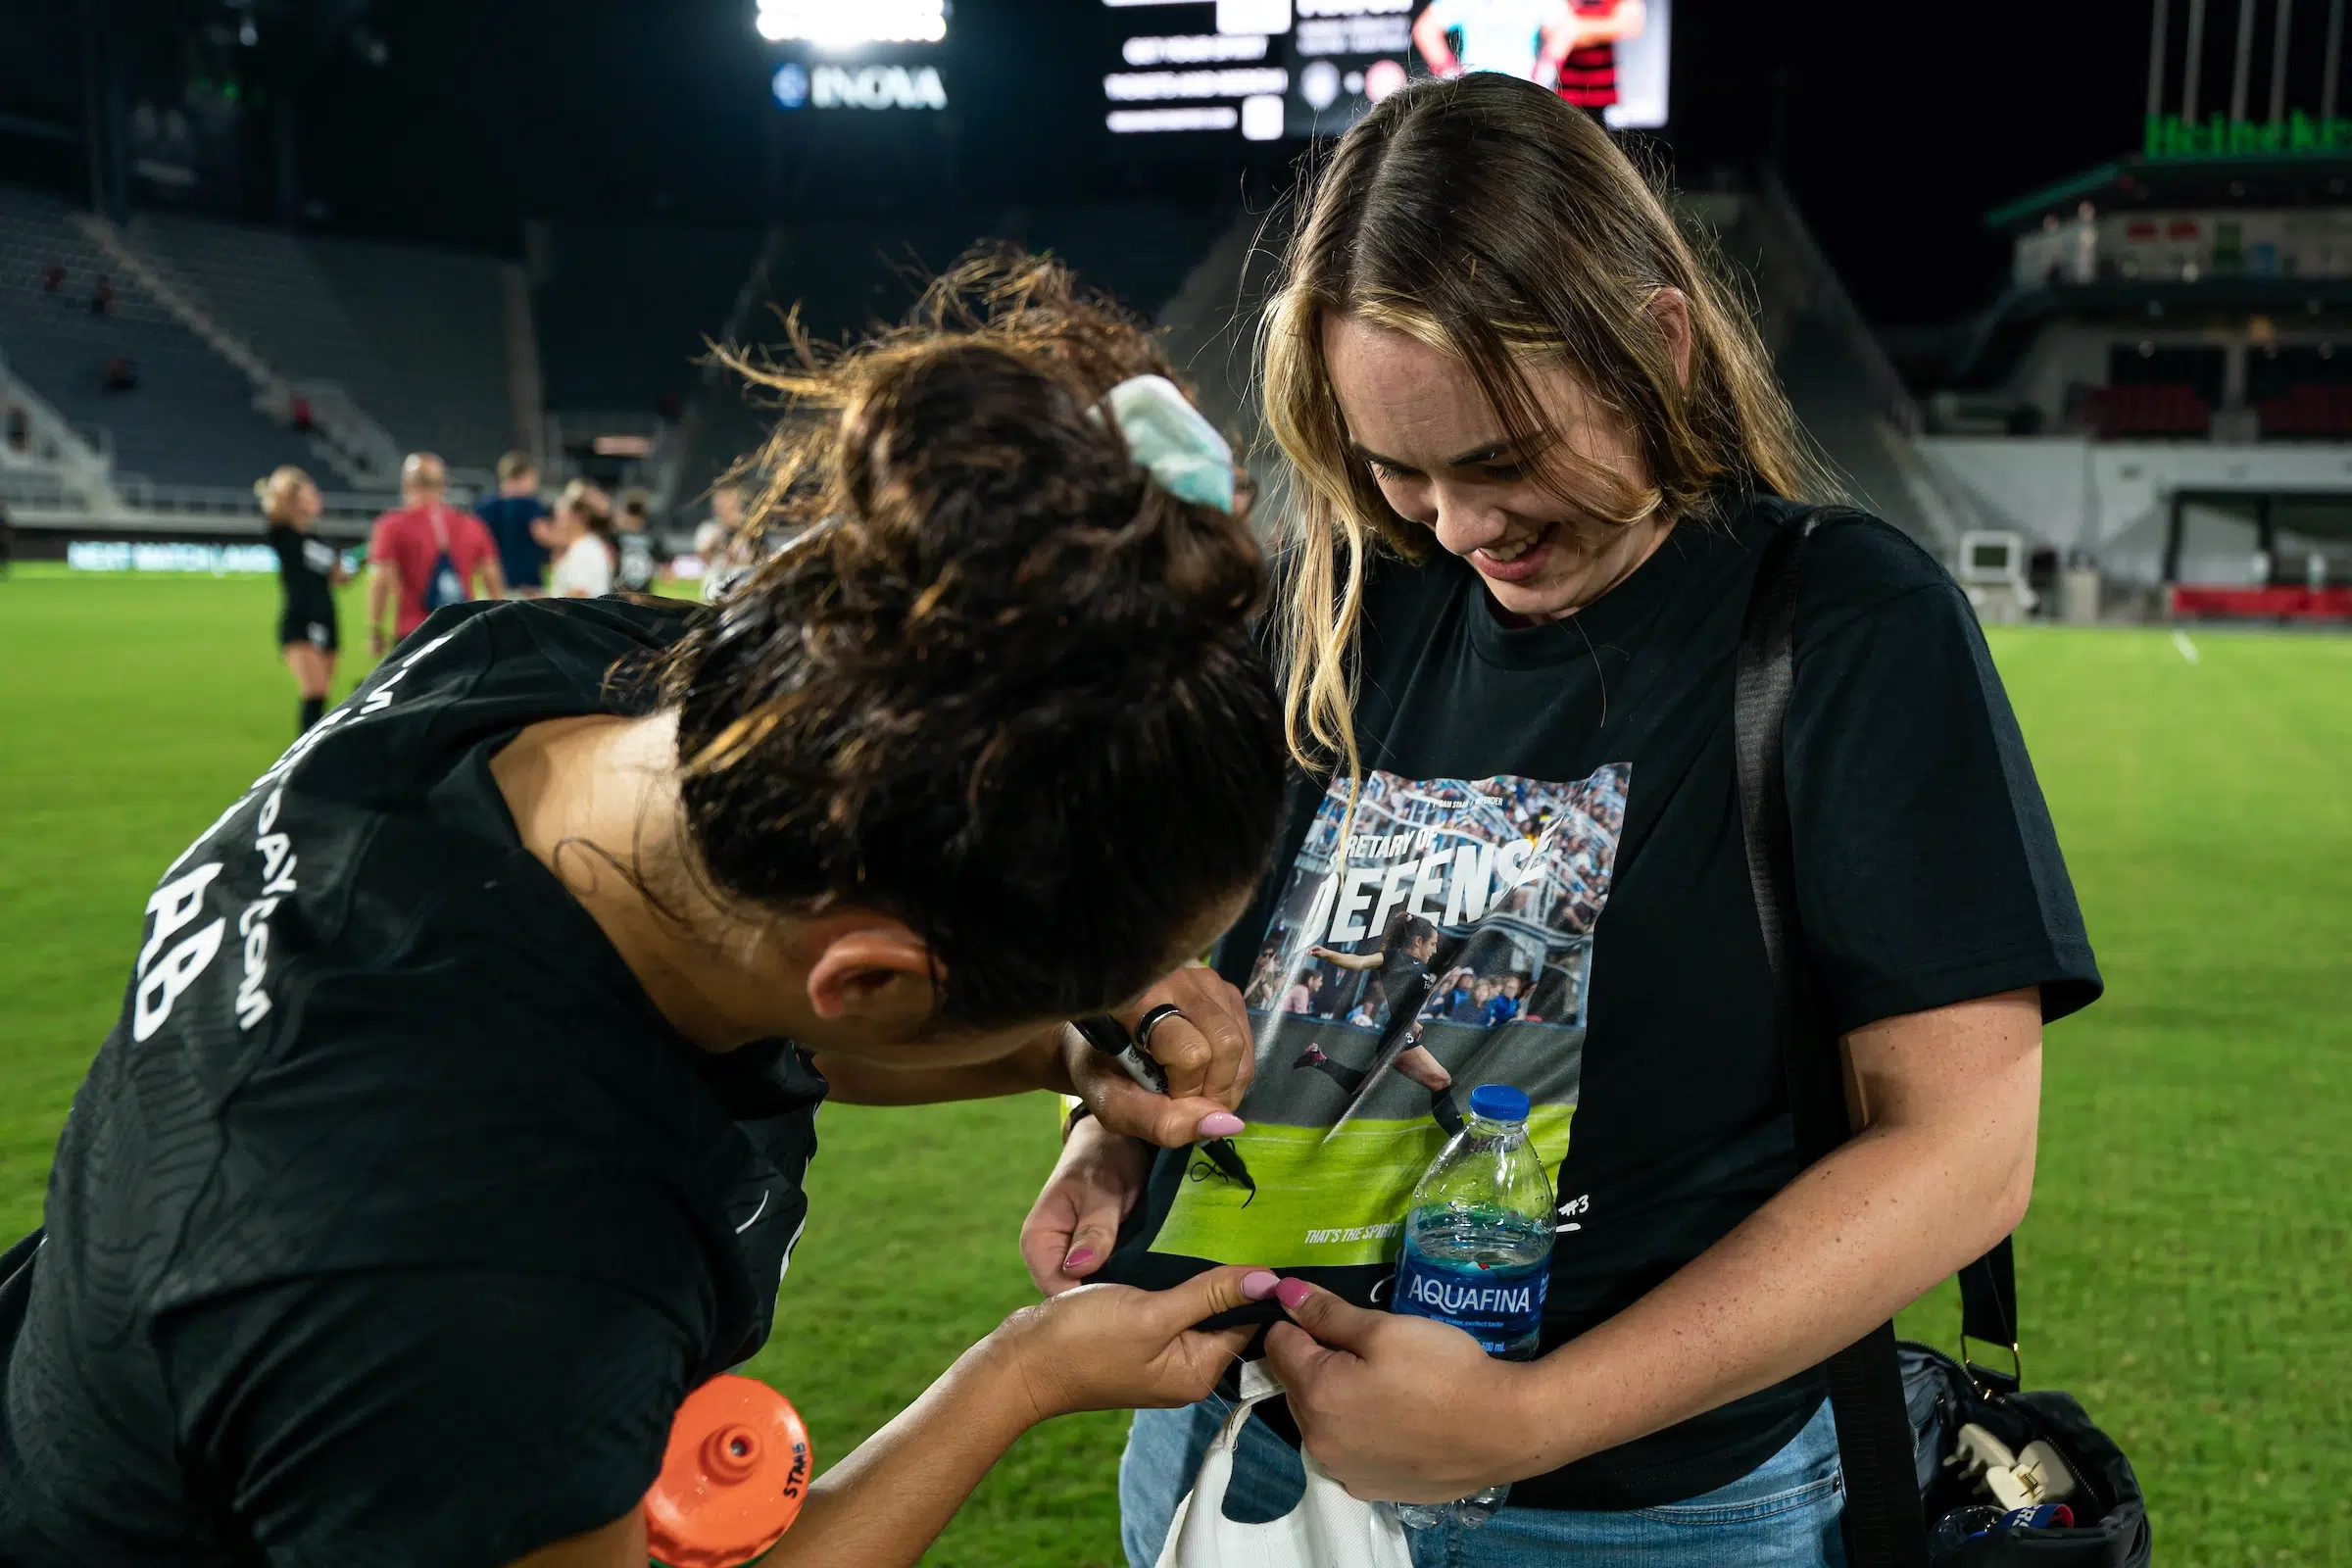 Sam Staab signs a fan's t-shirt which features an image of Staab. The fan is holding the shirt away from her body and looking down as Staab signs.